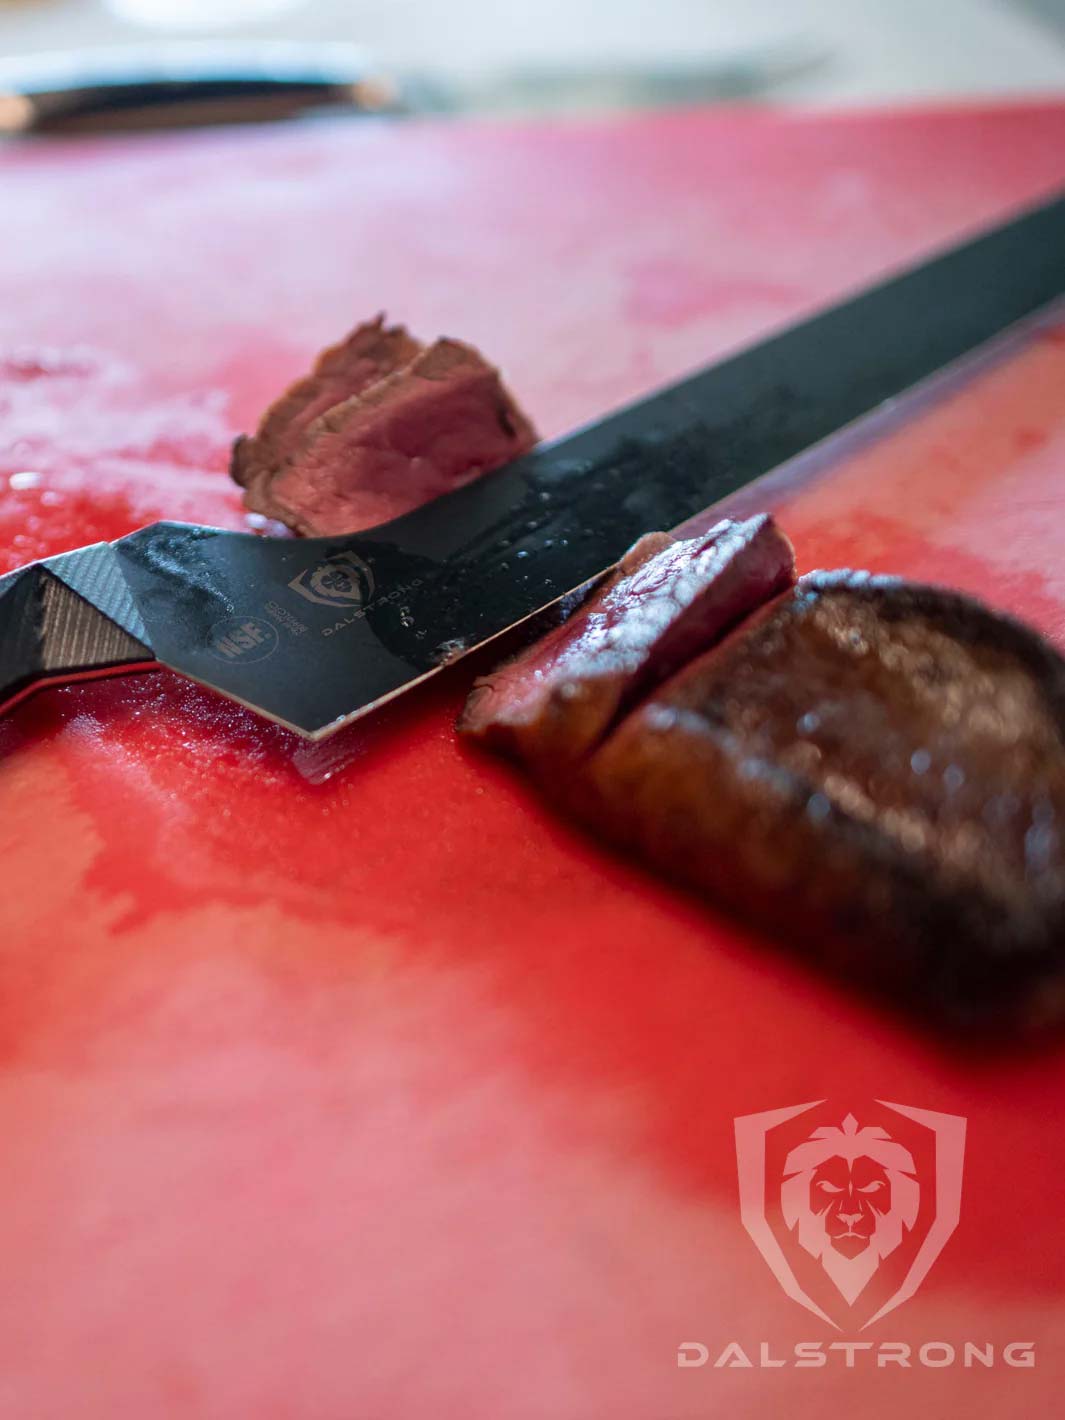 Dalstrong shadow black series 12 inch offset slicer knife with slices of steak on the side.